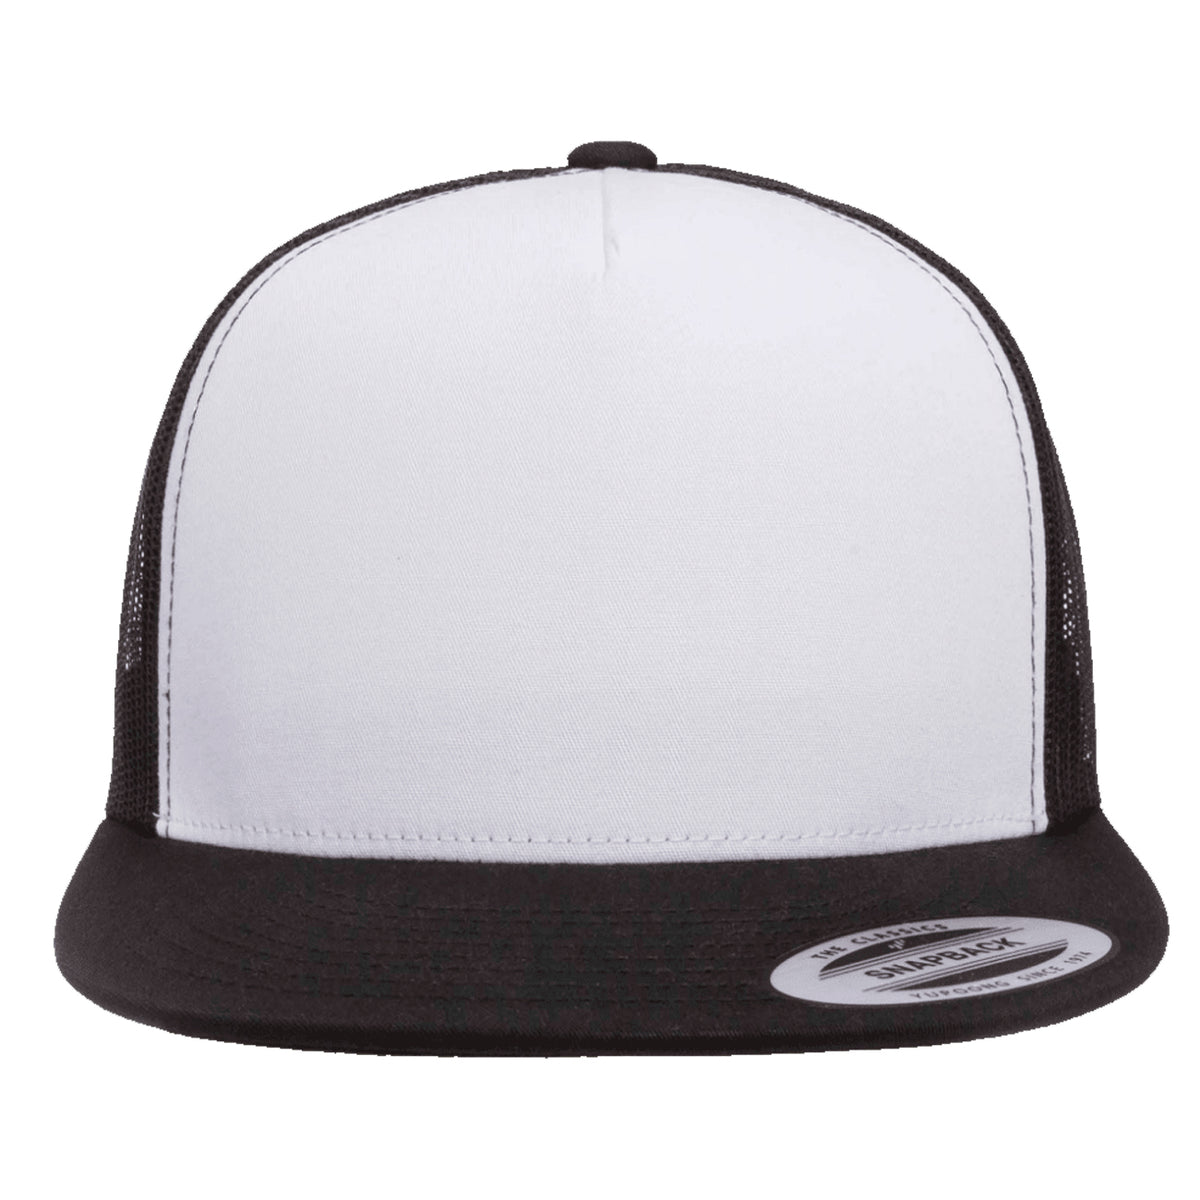 Yupoong Front Adjustable Flexfit White 2040USA Classic Panel – Cap Trucker